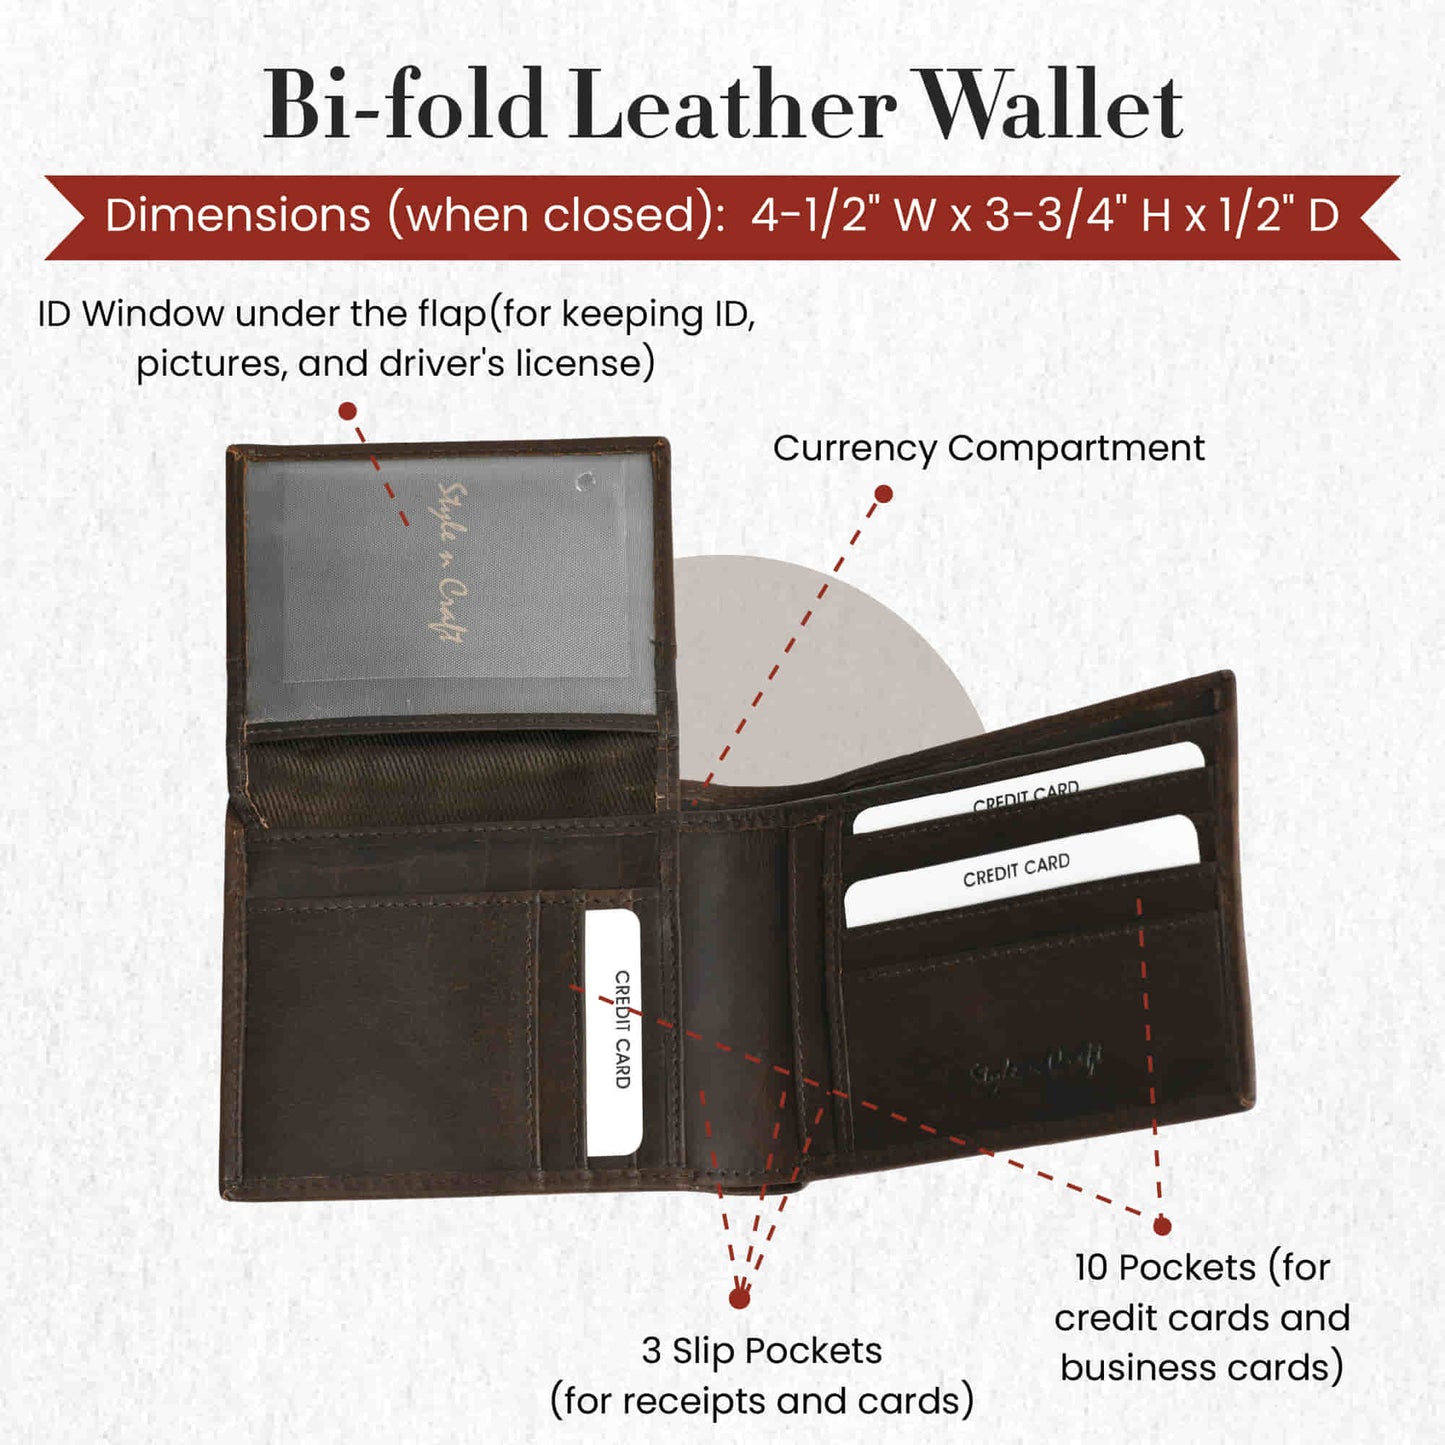 Style n Craft 391004 Bi-Fold PassCase Wallet with Flap in Dark Brown Top Grain Leather - Open View Showing the Details of All the Pockets & ID Window under Flap